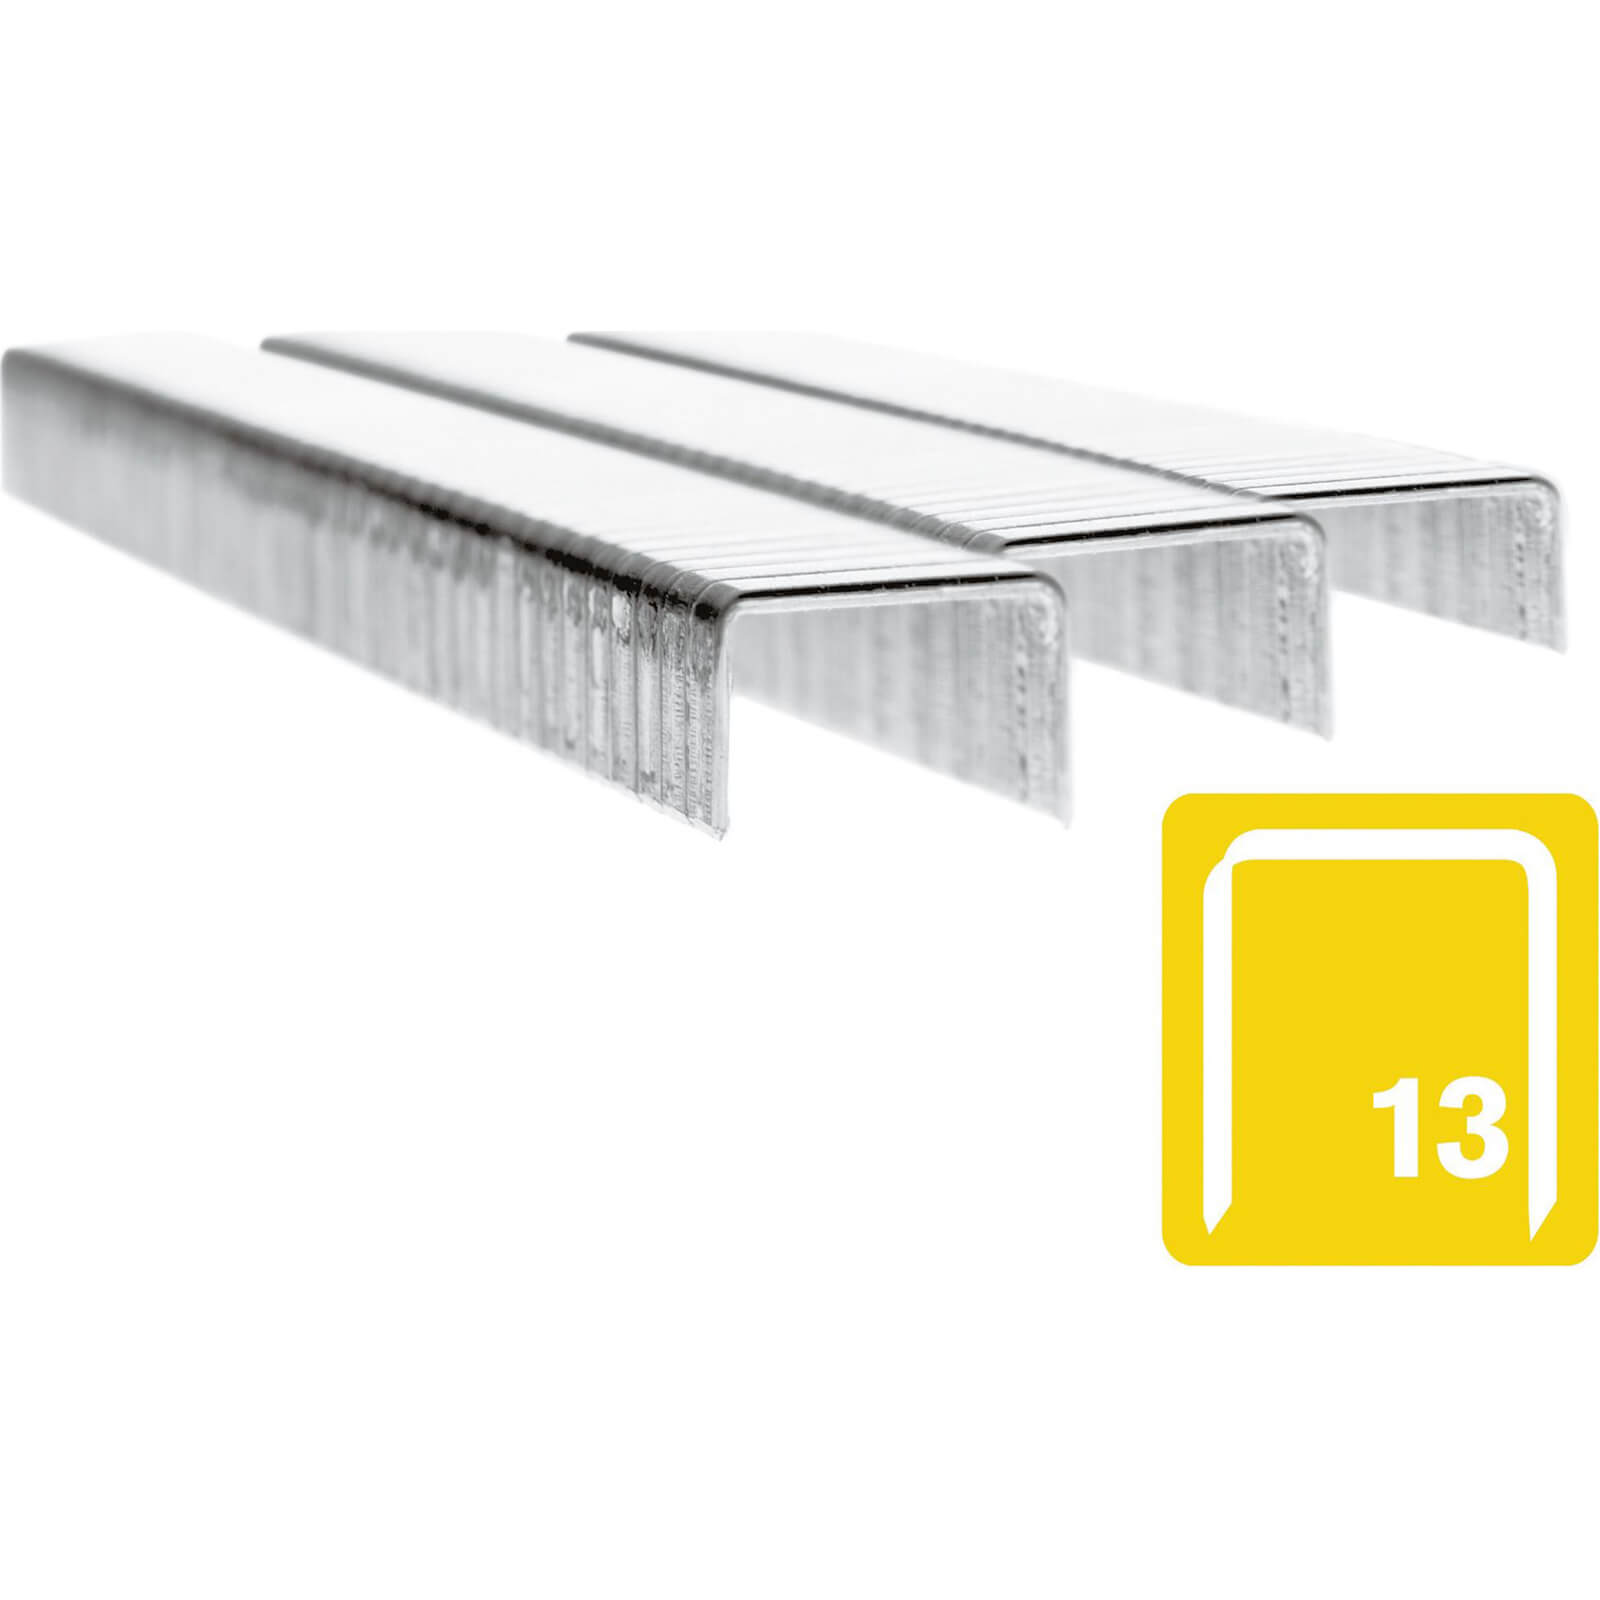 Rapid 13/6mm Stainless Steel Staples Pack of 2500